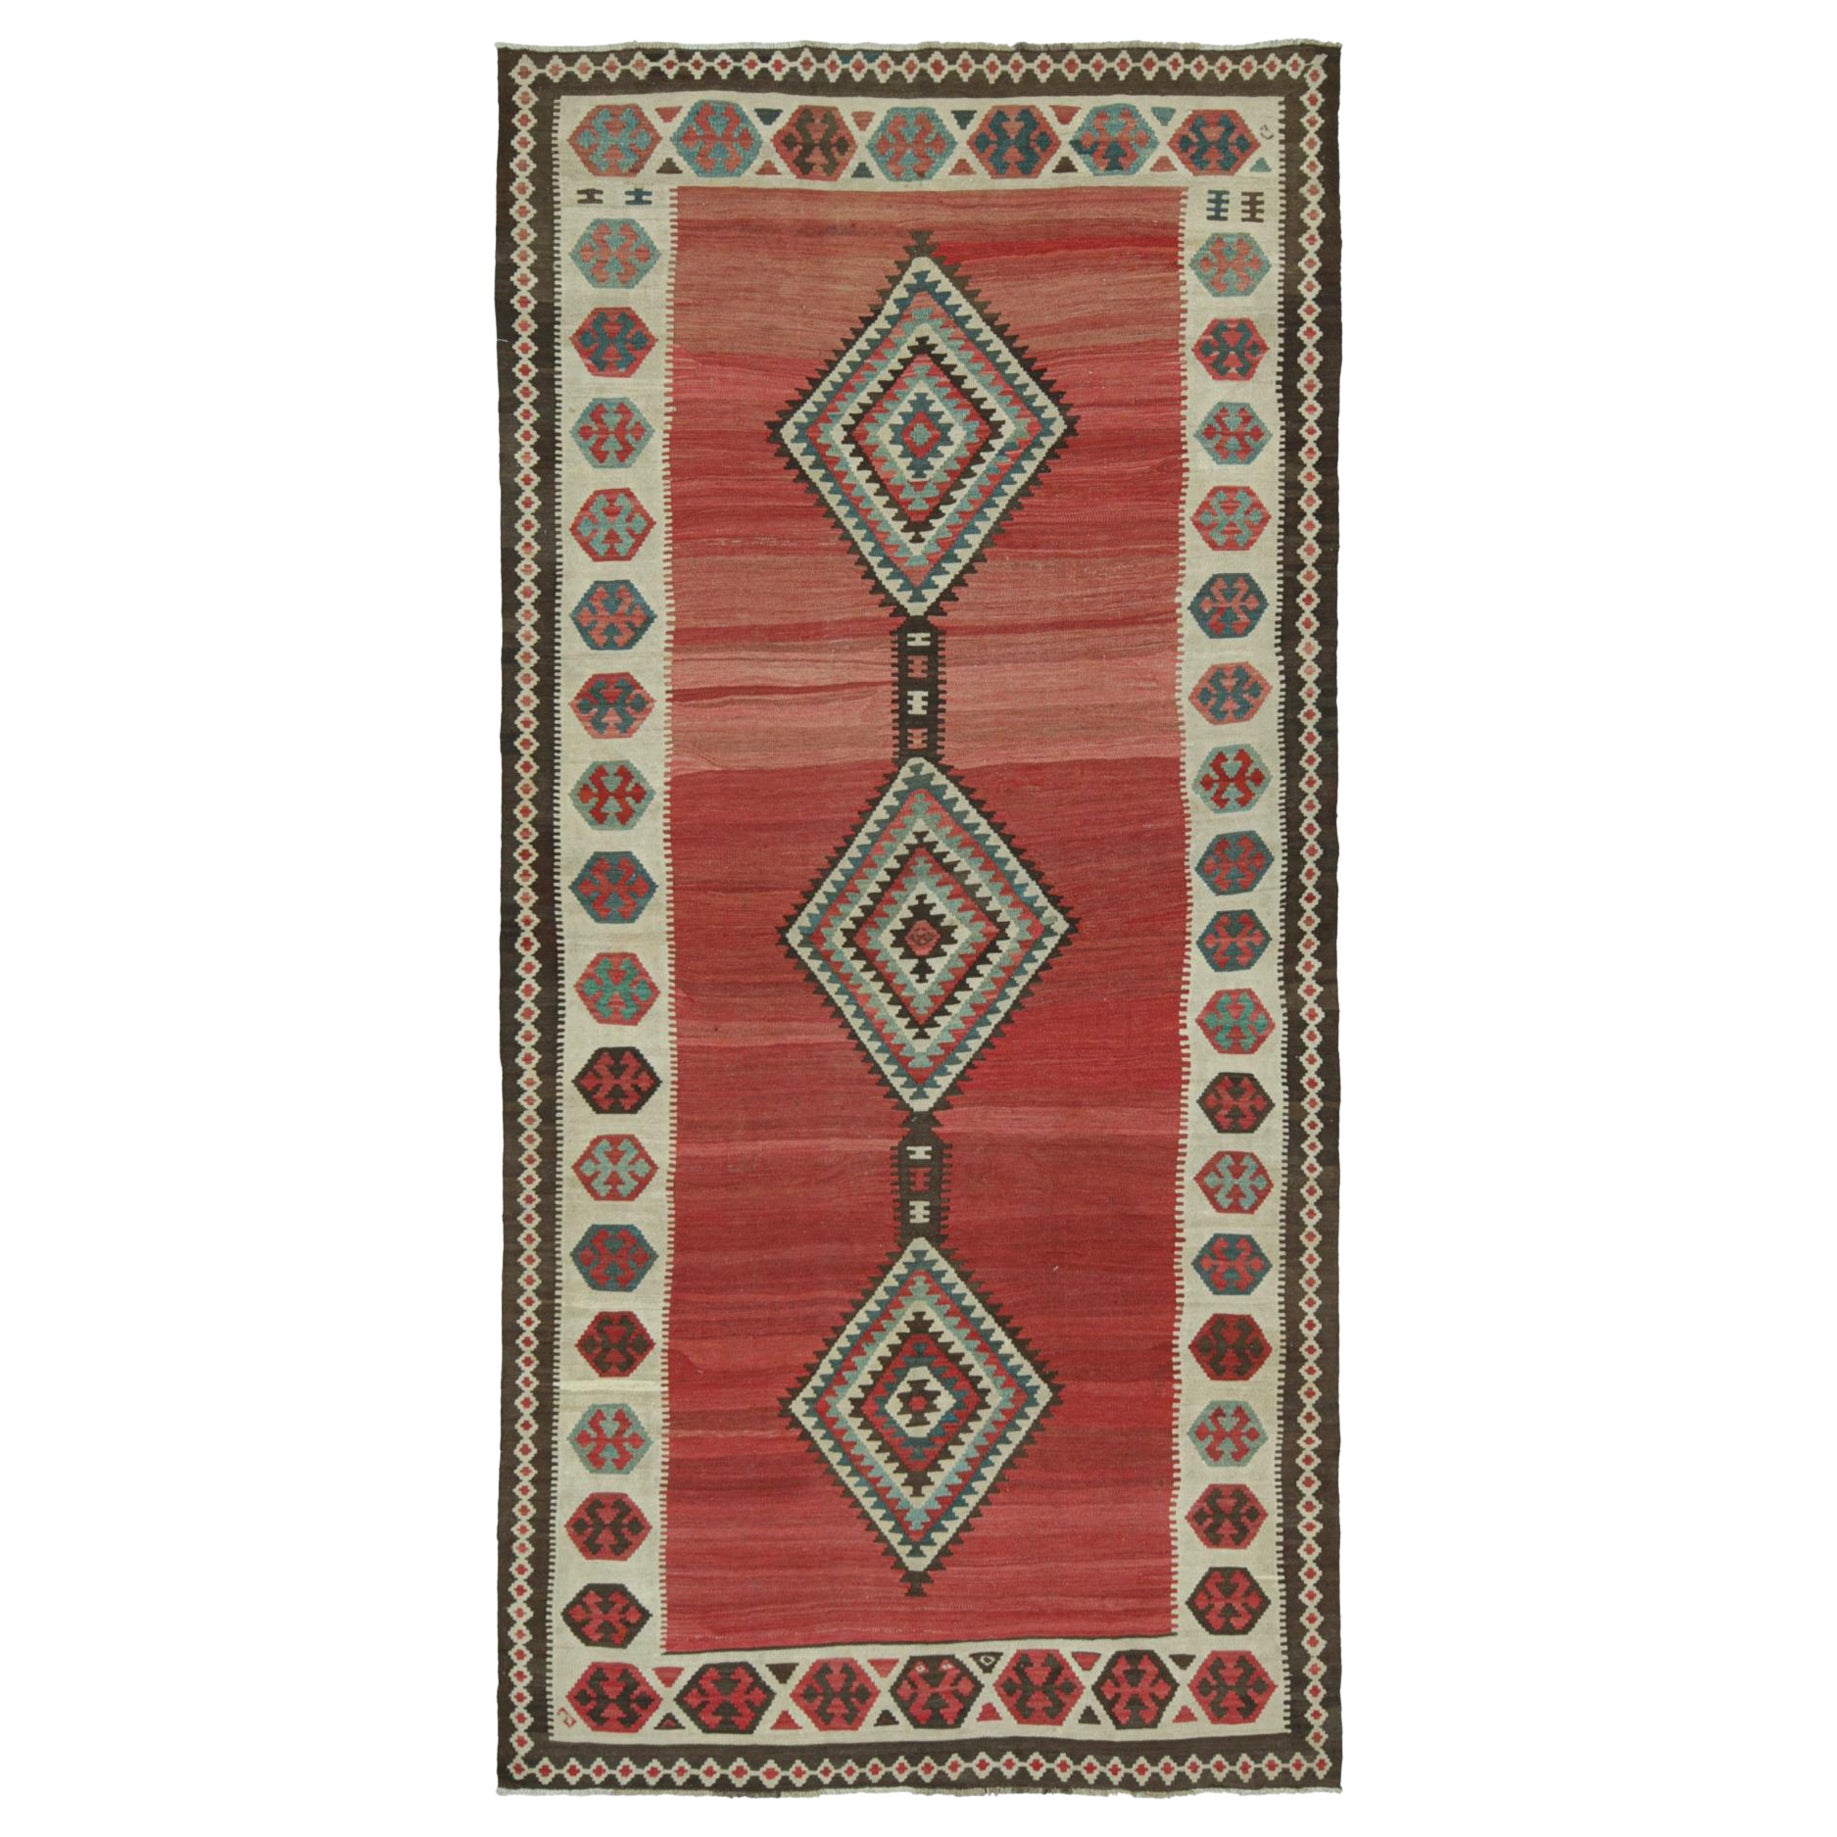 Vintage Shahsavan Persian Kilim with Red Field and Medallions